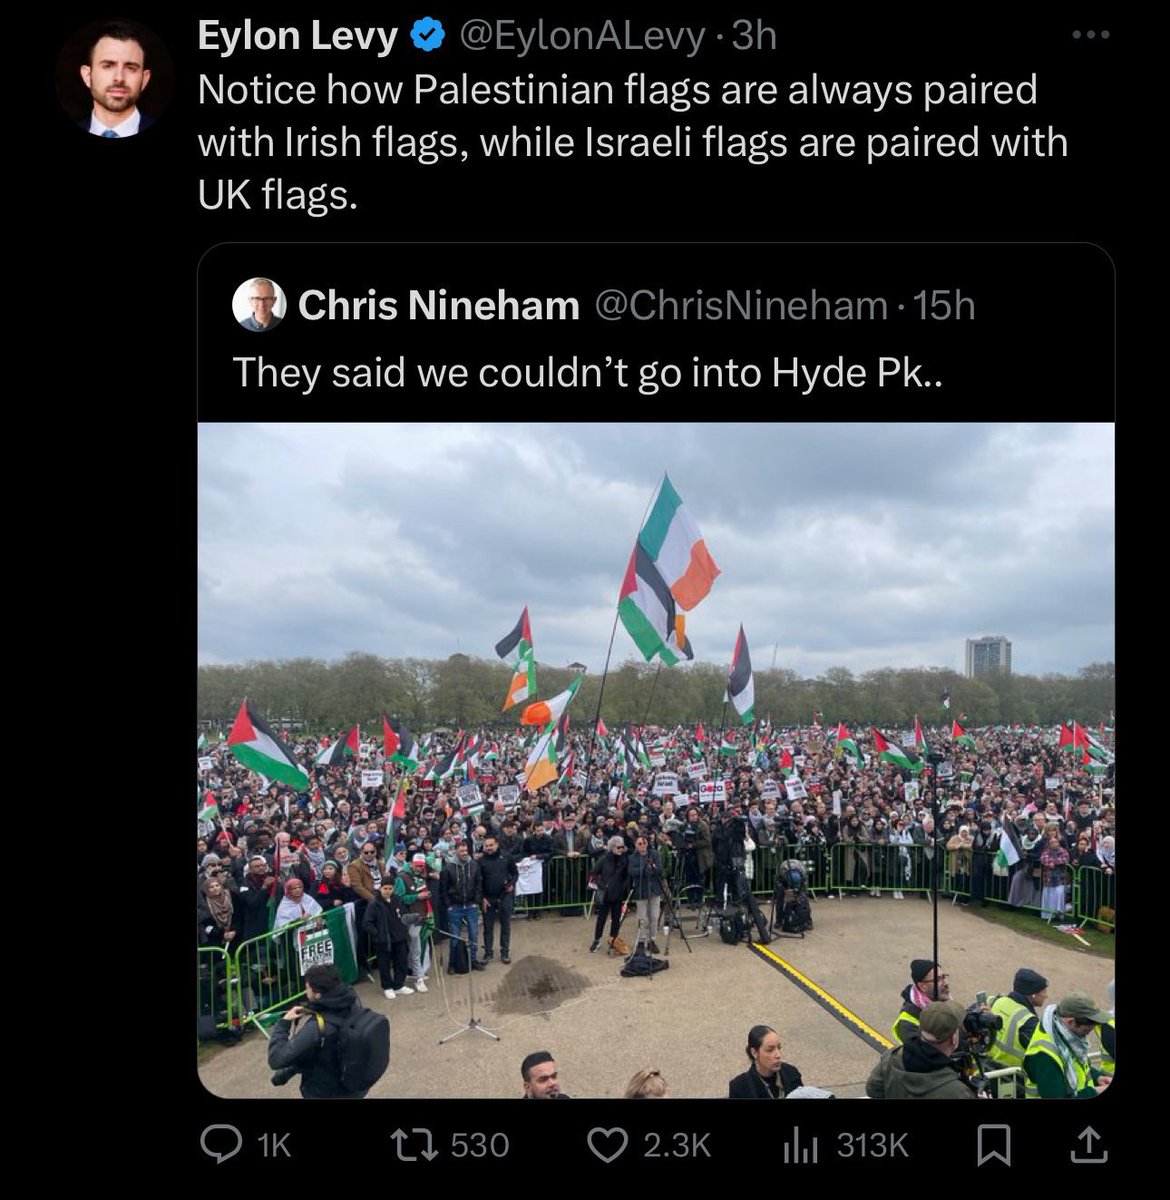 The gift that keeps on giving 🤣 His next missive will be ‘notice how Palestinian flags are carried by those black/brown people, while Israeli flags are carried by white far right extremists’ 👀